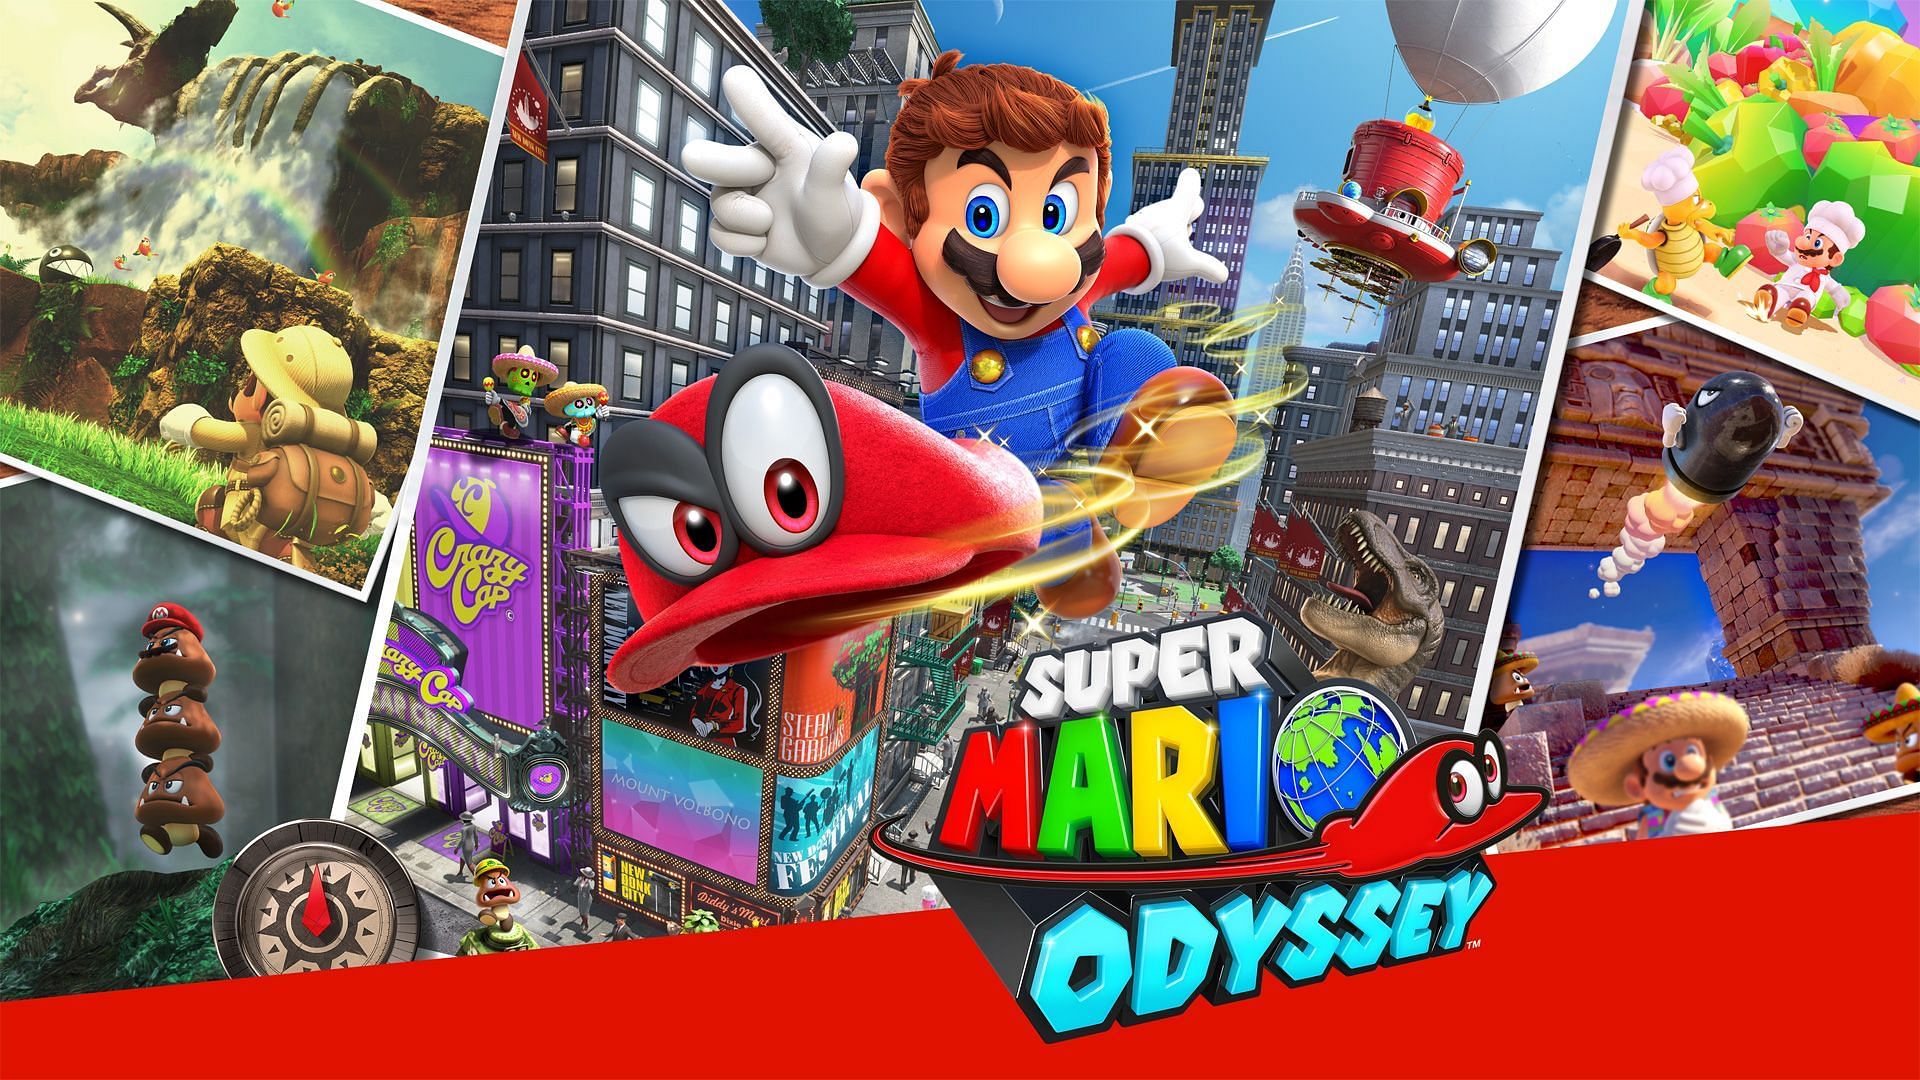 Super Mario Odyssey is a highly-rated game that many gamers love (Image via Nintendo)